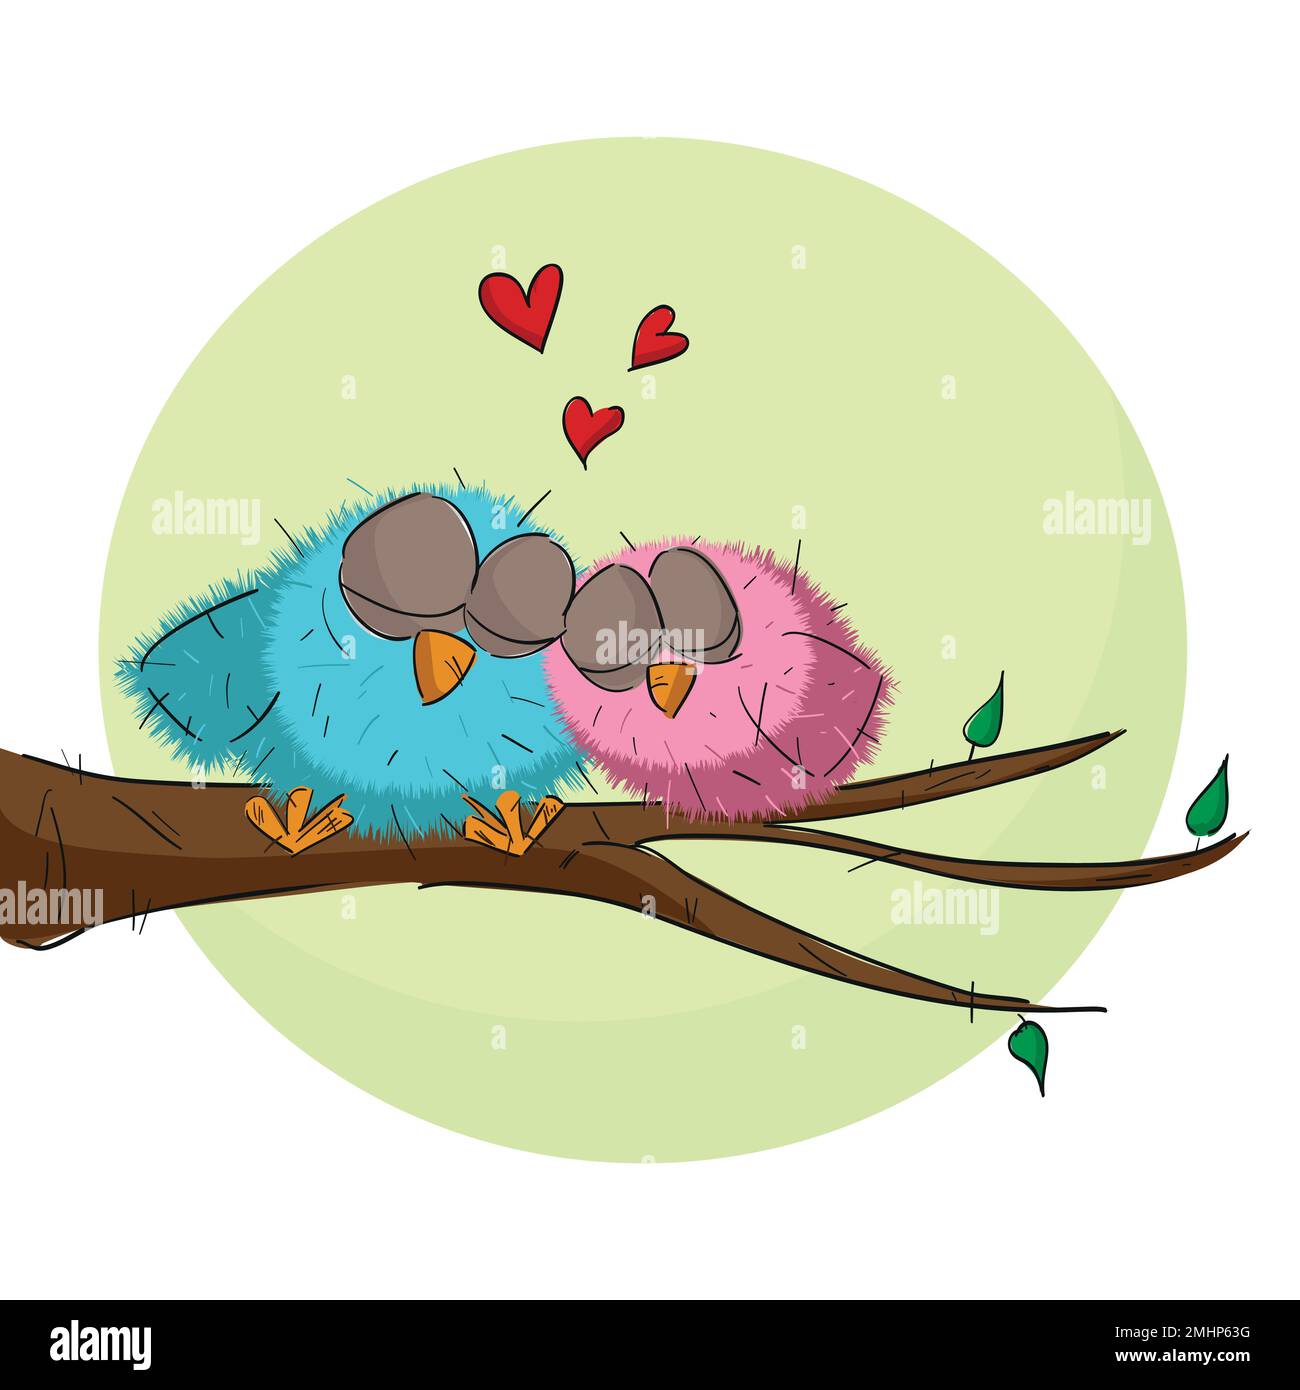 Cute illustration of two loving birds on a tree branch with a large moon in the background. Valentine's Day Card Stock Vector